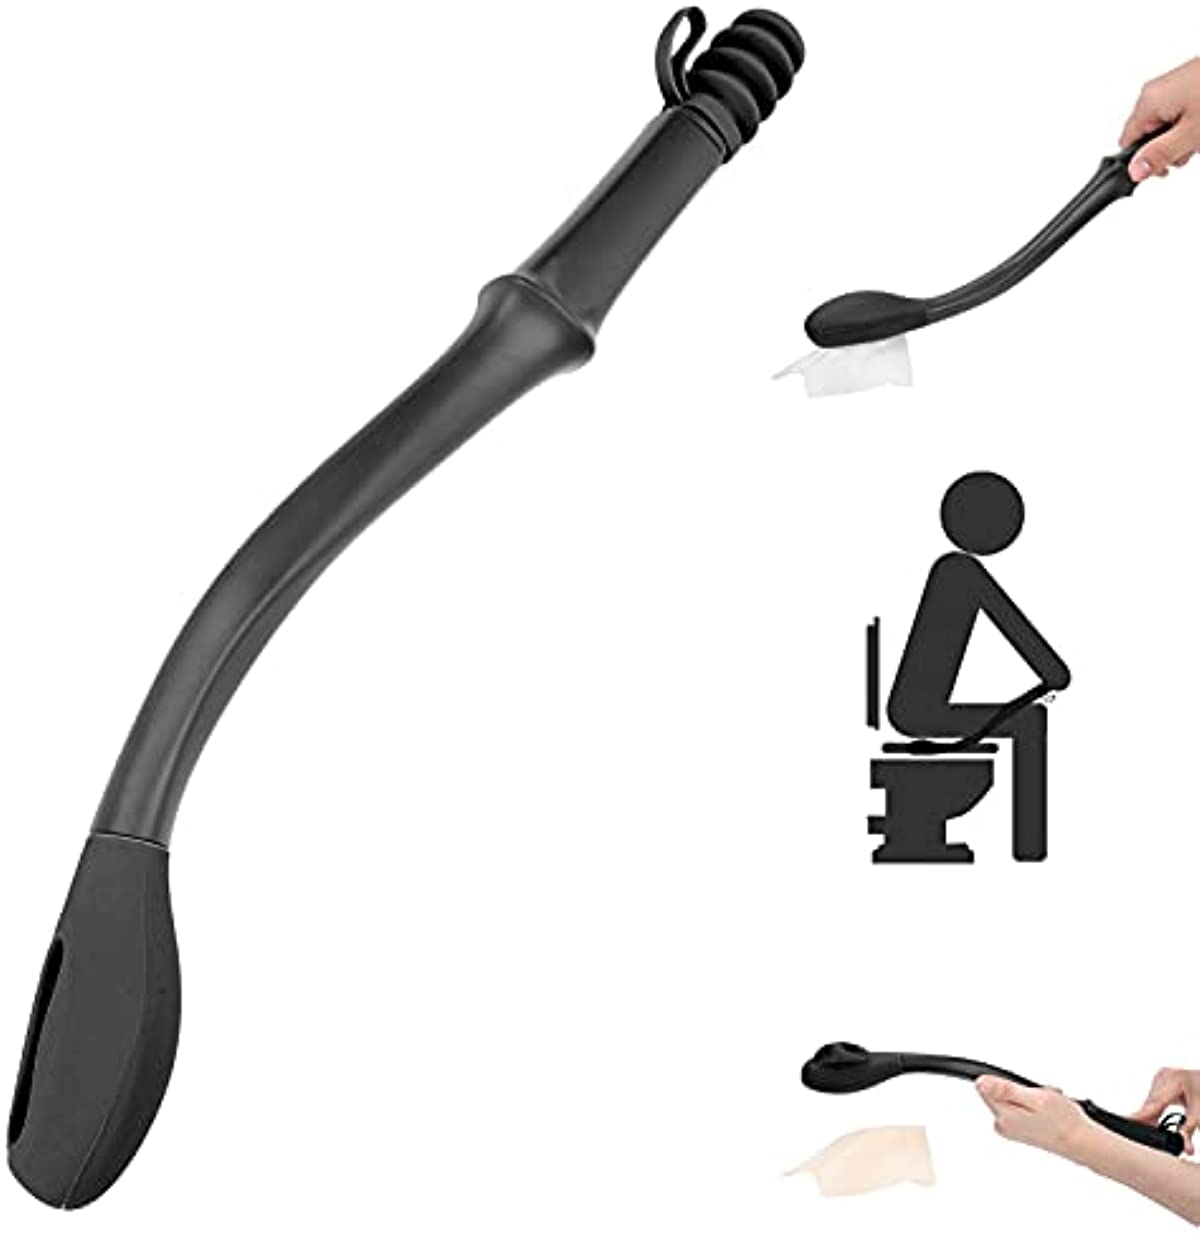 Toilet Aids Tools, 15.7in Long Reach Comfort Wiper Toilet Paper Wiping Aids Long Reach Comfort Self Assist Wiper Wipe Assist Tool for Limited Mobility Elderly Inconvenient People(black)